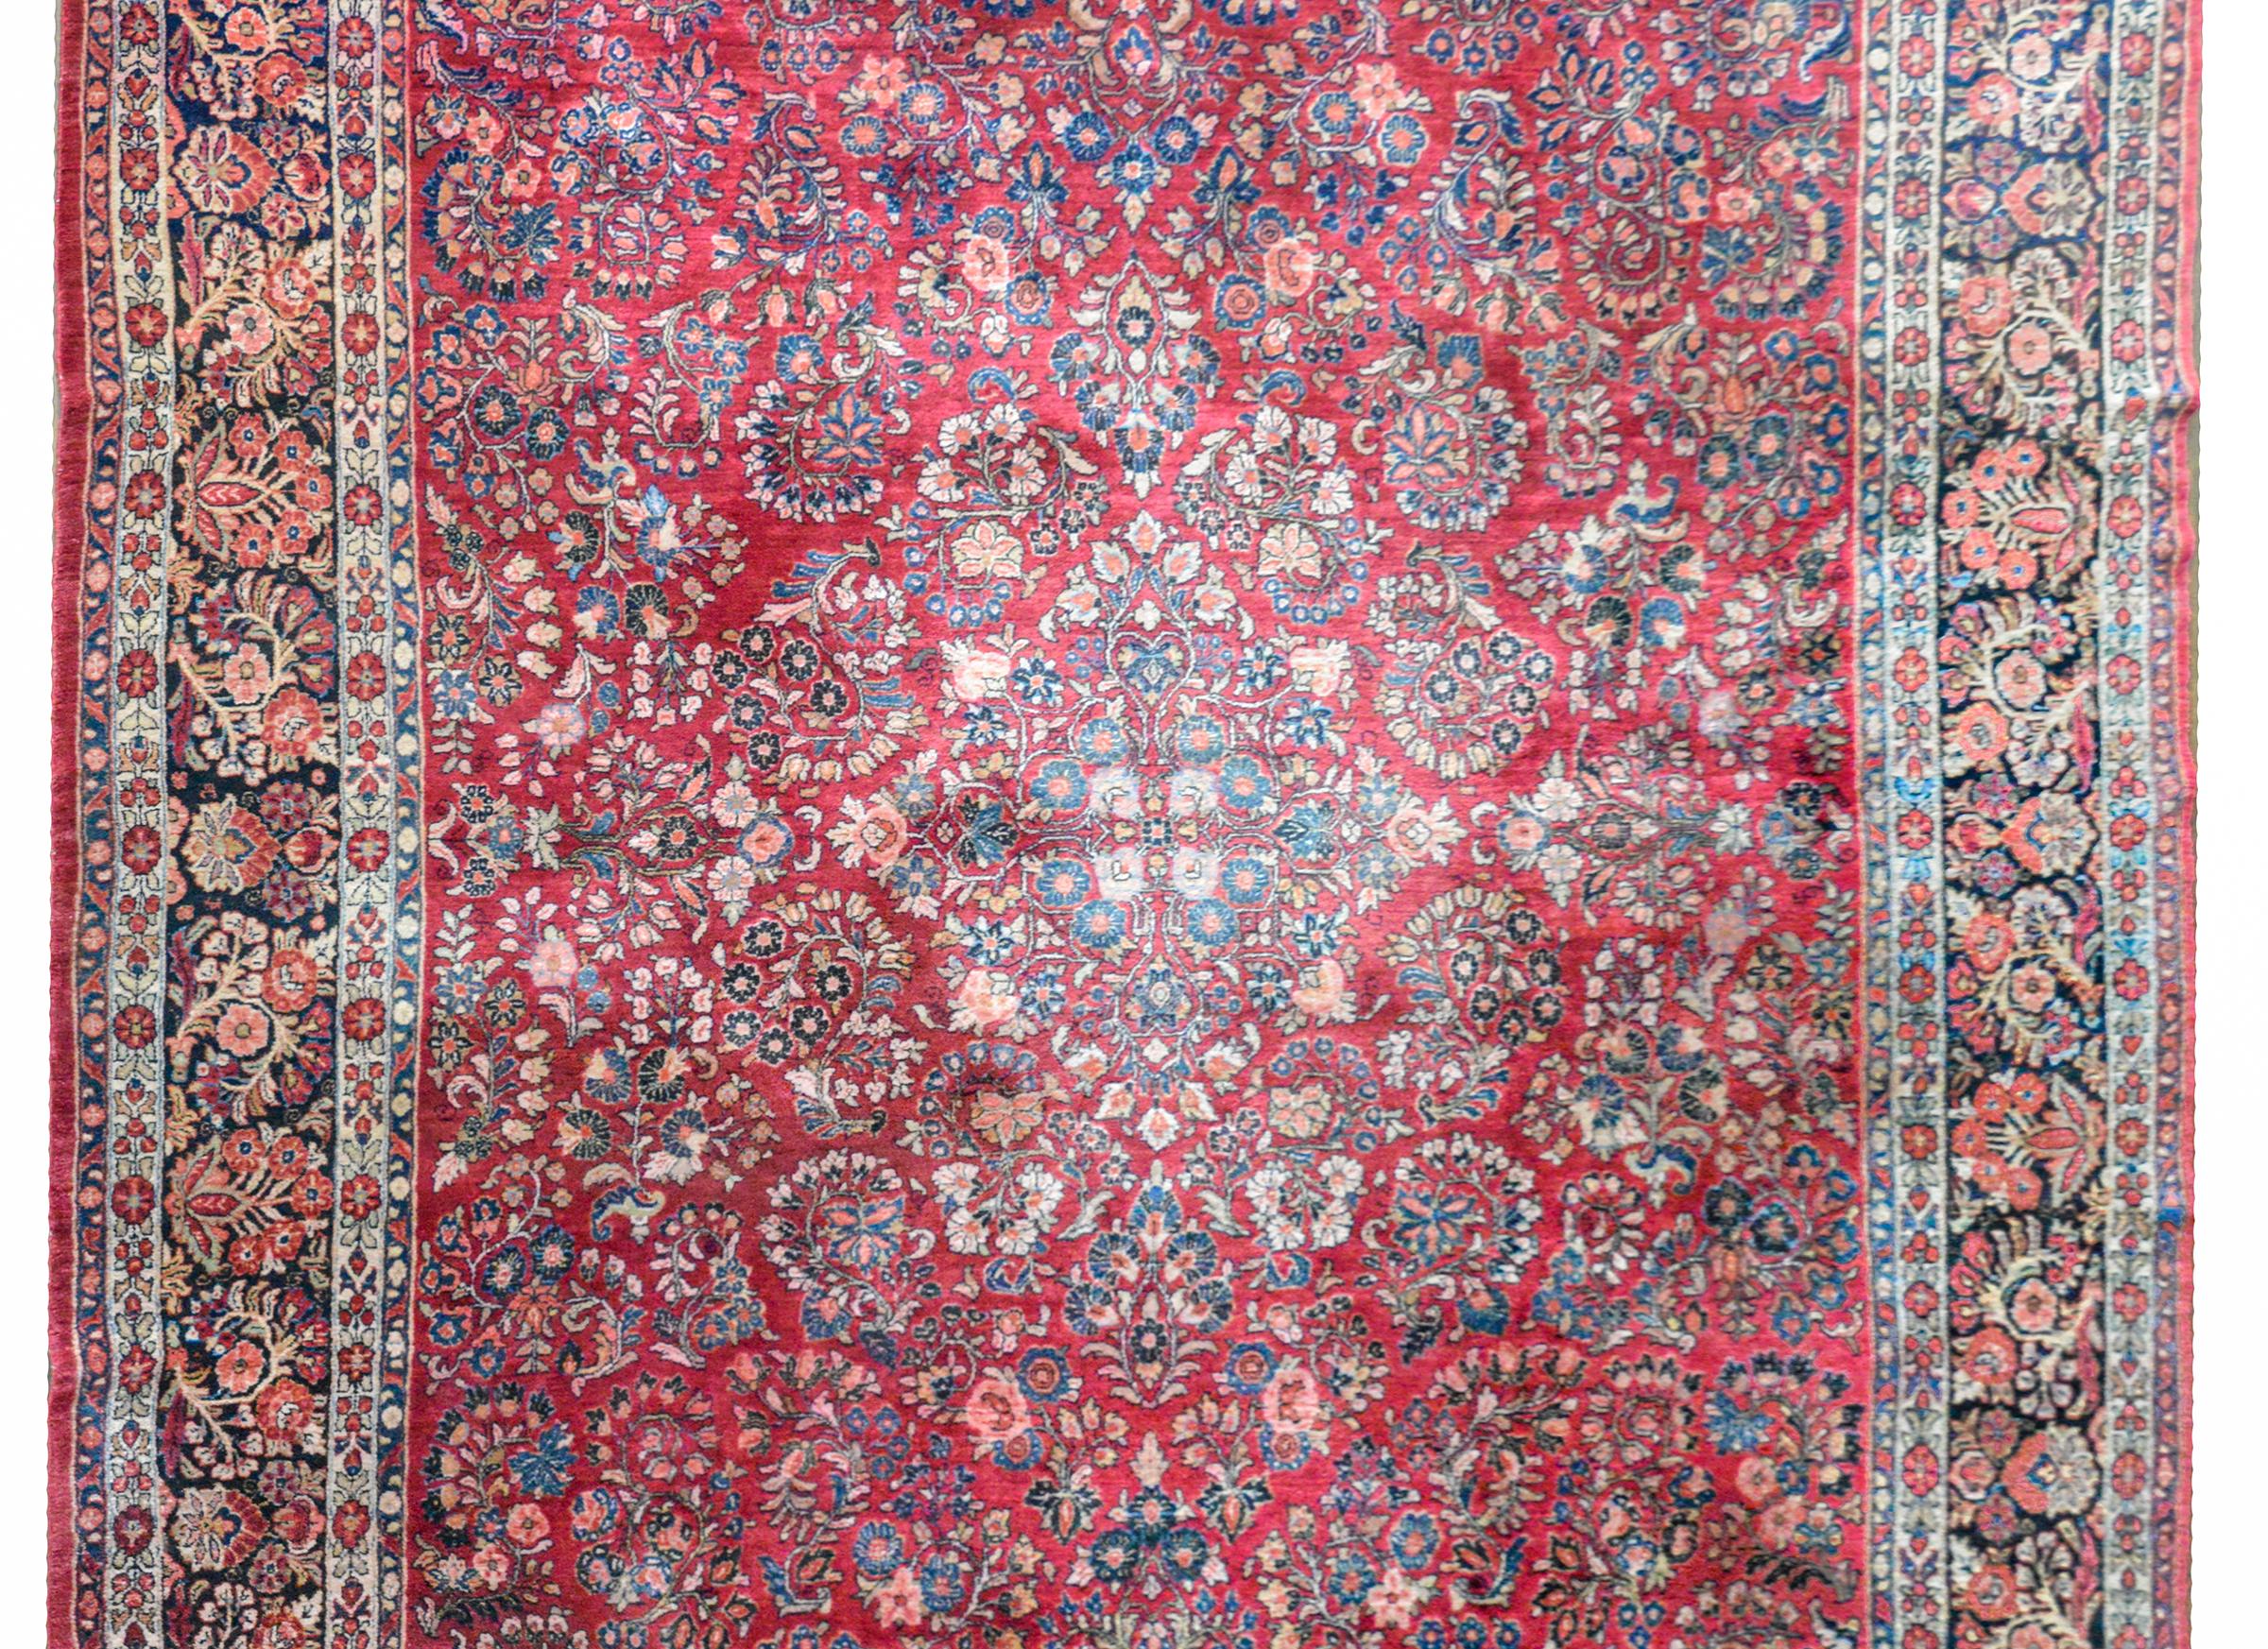 A early 20th century Persian Sarouk rug with a traditional pattern containing myriad clusters of flowers woven in light and dark indigo, cream, pink, and green, set against a crimson background. The border is wide, with a central floral patterned